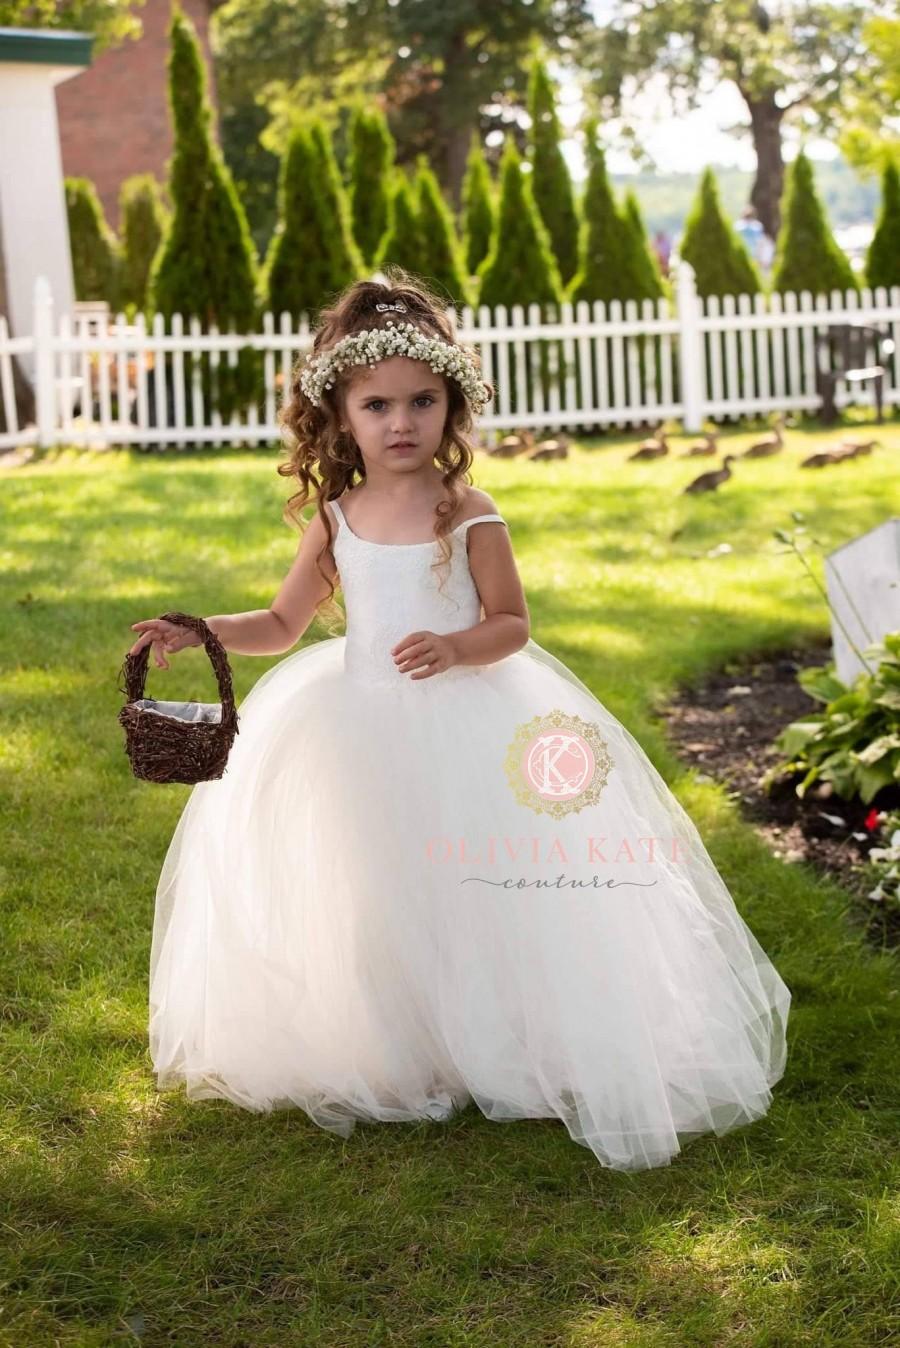 Wedding - French Lace Flower Girl Dress, Tulle Tutu Flower Girl Dresses, Toddler Dress, Weddings